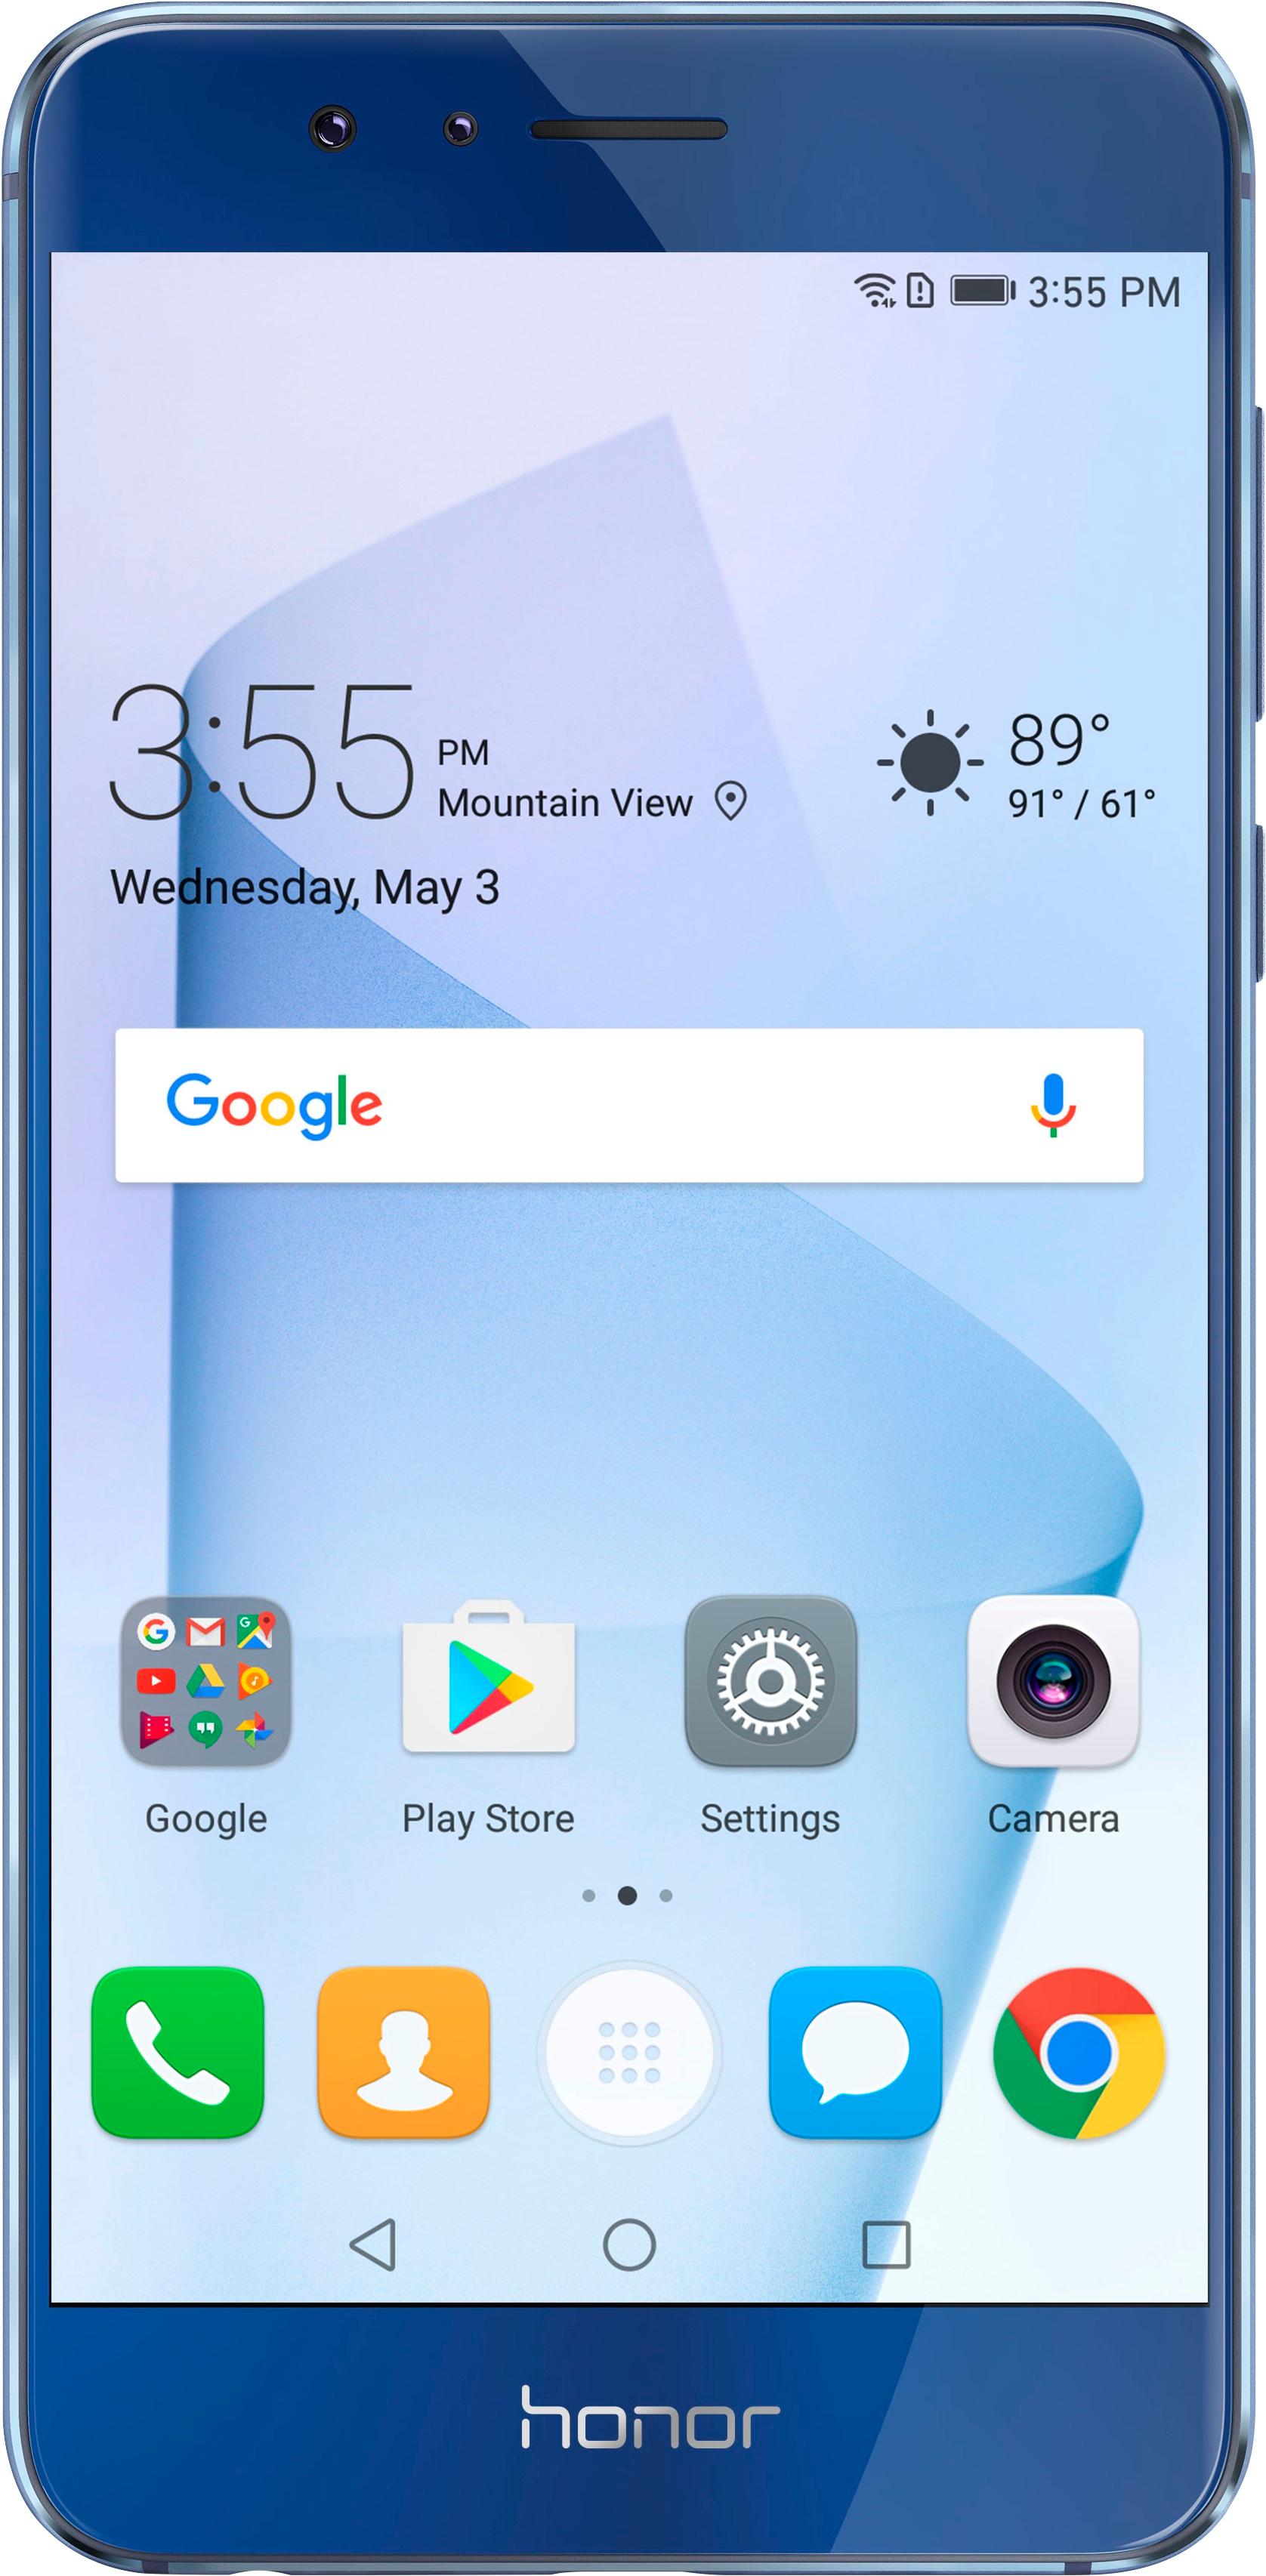 heb vertrouwen repetitie tekort Huawei Honor 8 4G LTE with 32GB Memory Cell Phone (Unlocked) Sapphire blue  FRD-L04 - Best Buy